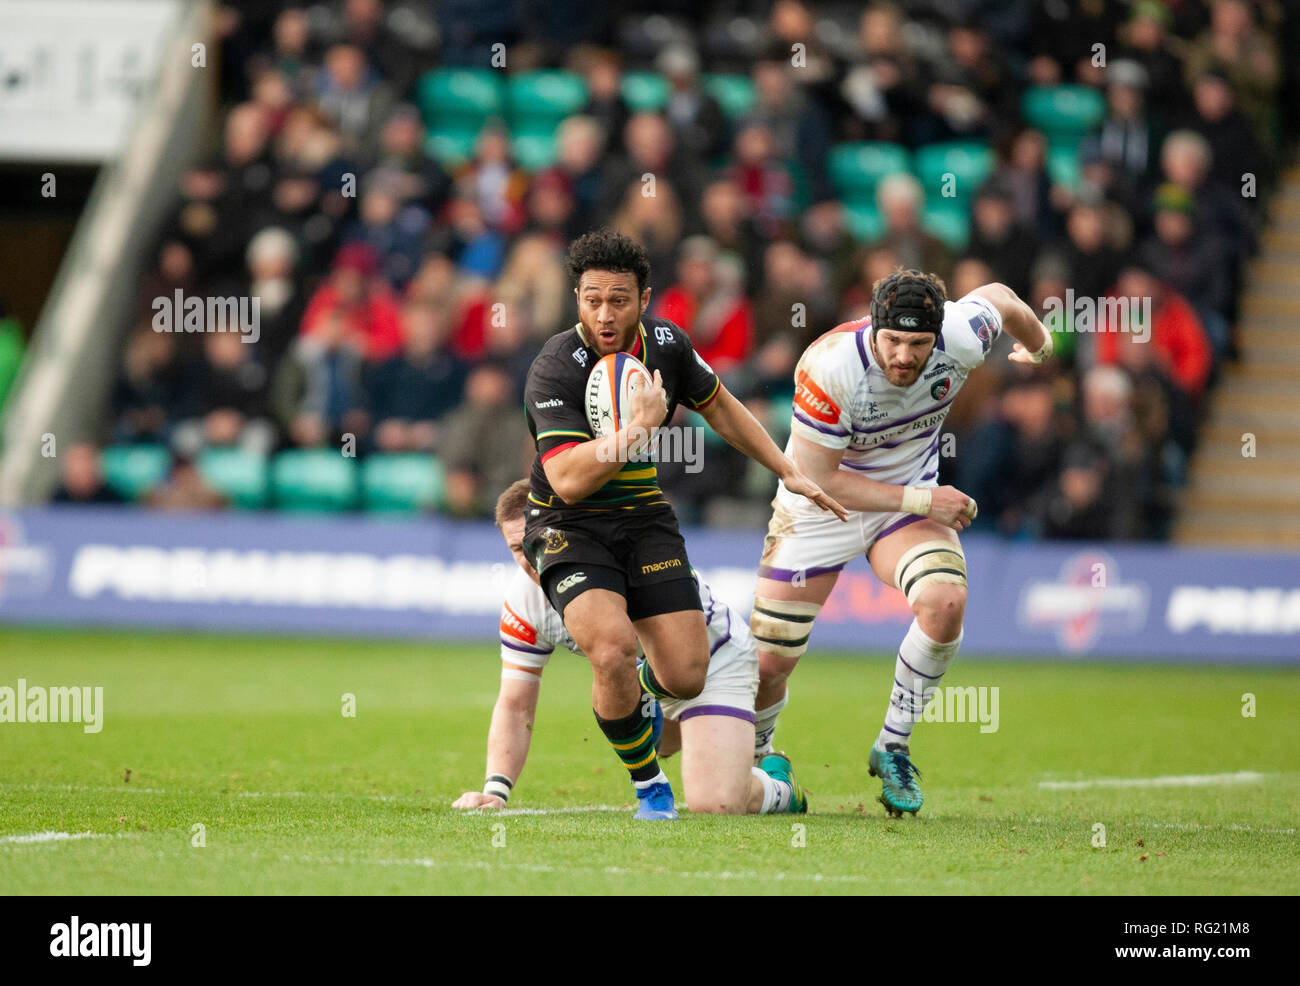 Northampton, UK. 26th January 2019. Nafi Tuitavake of Northampton Saints runs with the ball during the Premiership Rugby Cup match between Northampton Saints and Leicester Tigers. Andrew Taylor/Alamy Live News Stock Photo